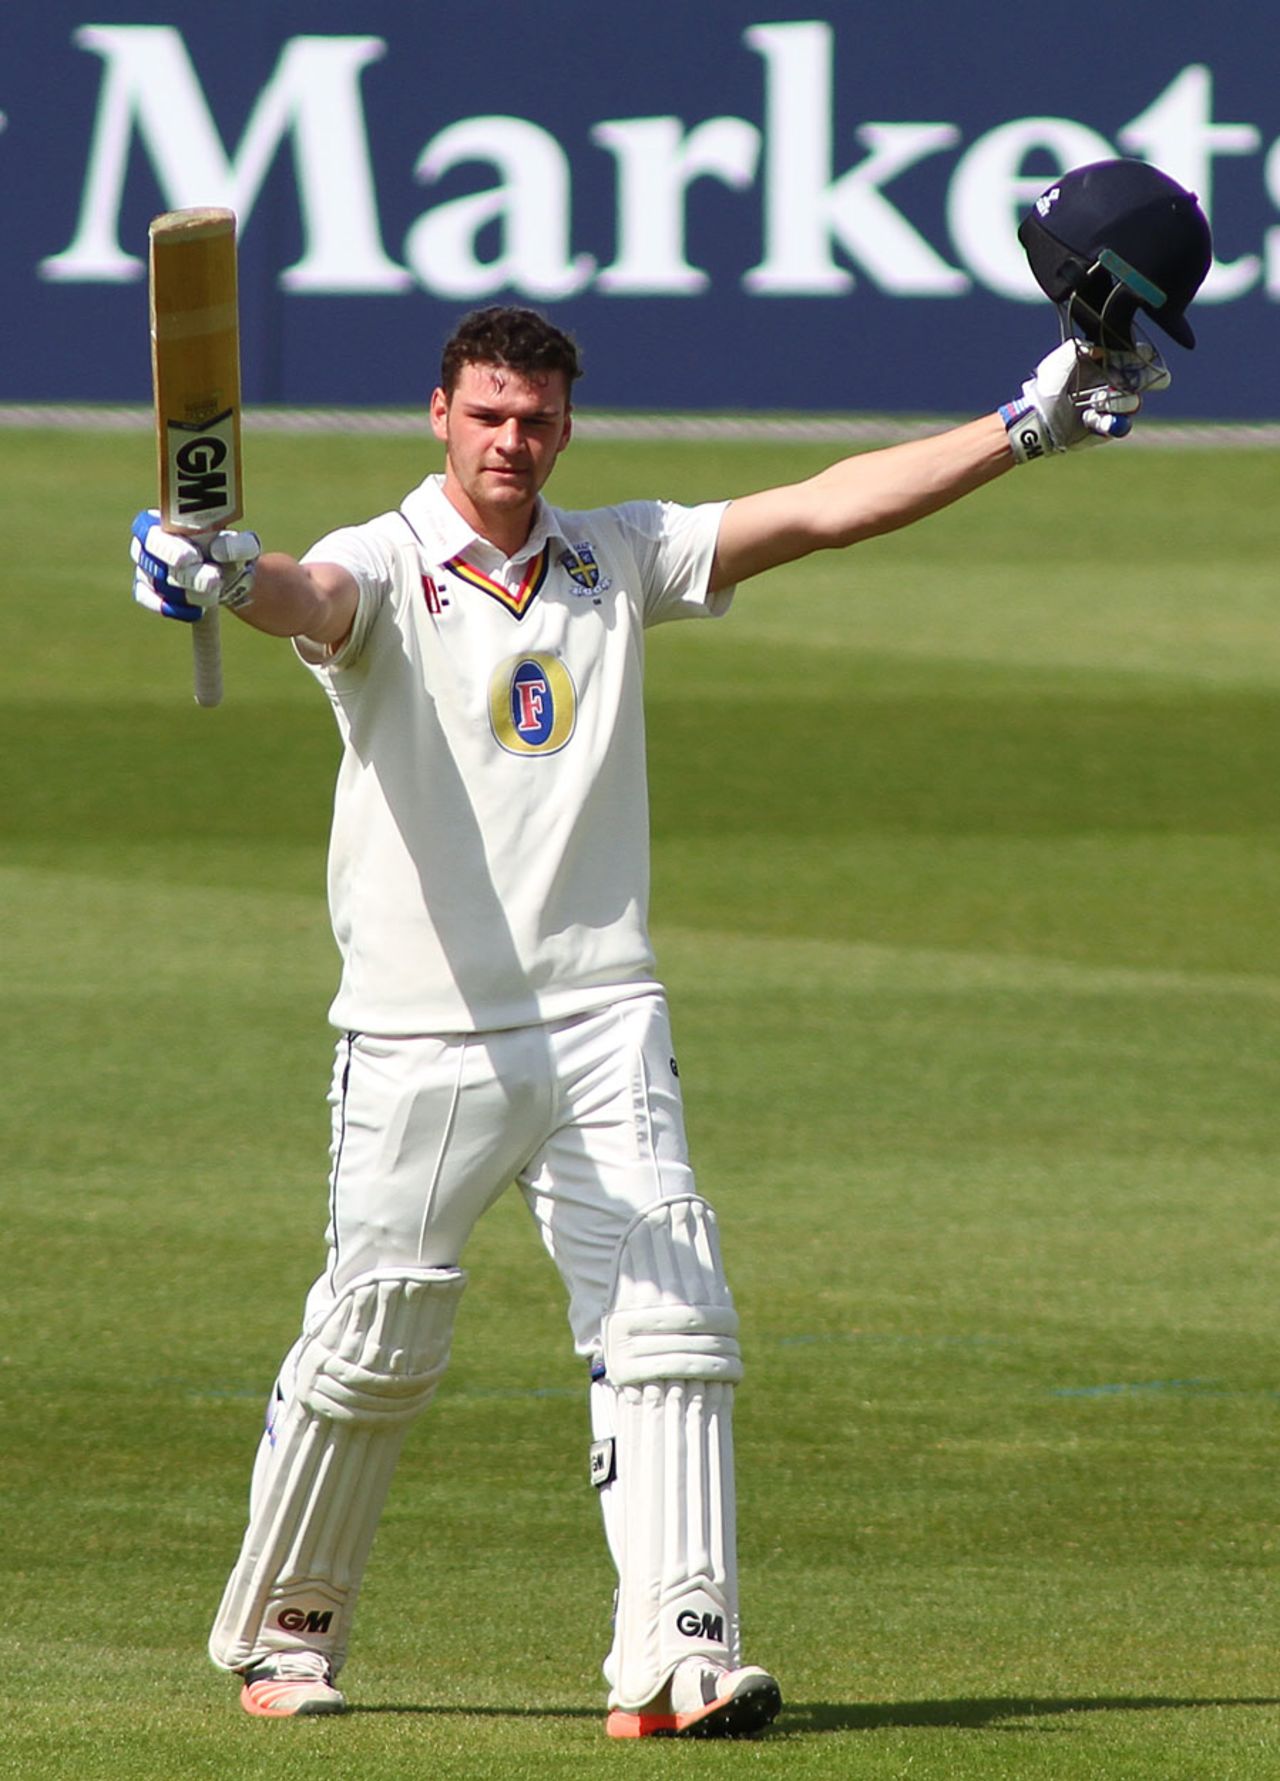 Jack Burnham reached his maiden first-class hundred, Surrey v Durham, County Championship, Division One, The Oval, 3rd day, May 3, 2016